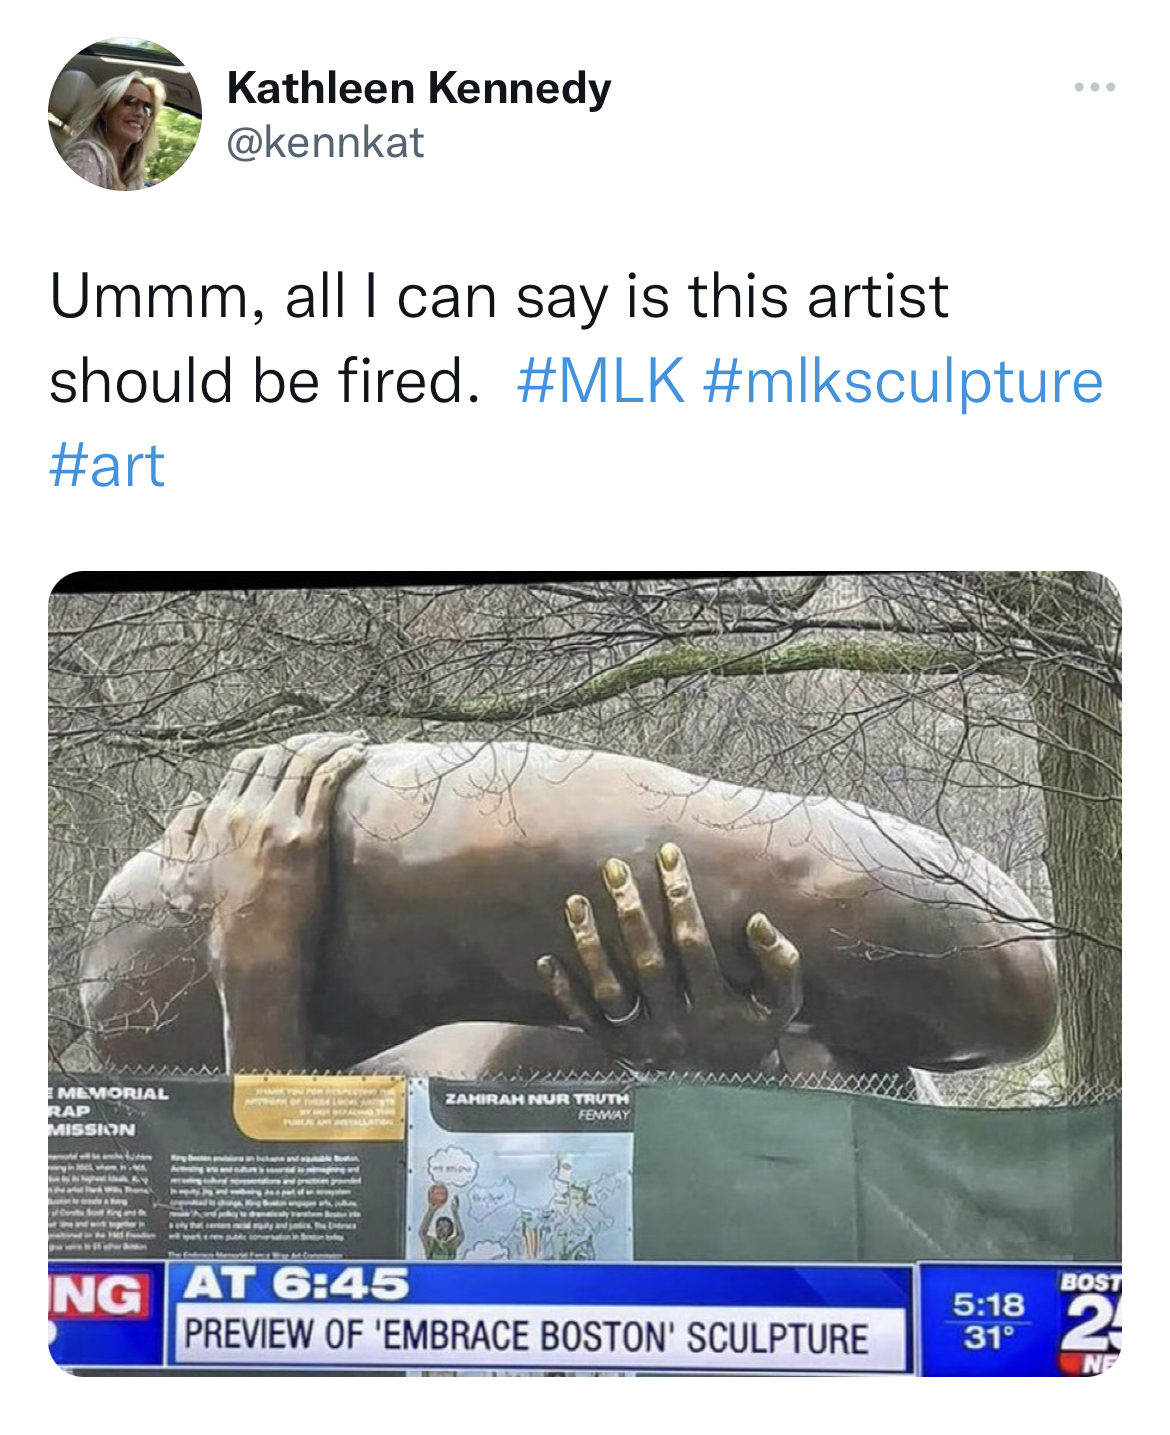 MLK Jr. Sculpture memes - Sculpture - Ummm, all I can say is this artist should be fired. Memorial Kathleen Kennedy Hap Mission Ng At Sp Mo 200 Zahmah Mur Truth Preview Of 'Embrace Boston' Sculpture Bost 2 31